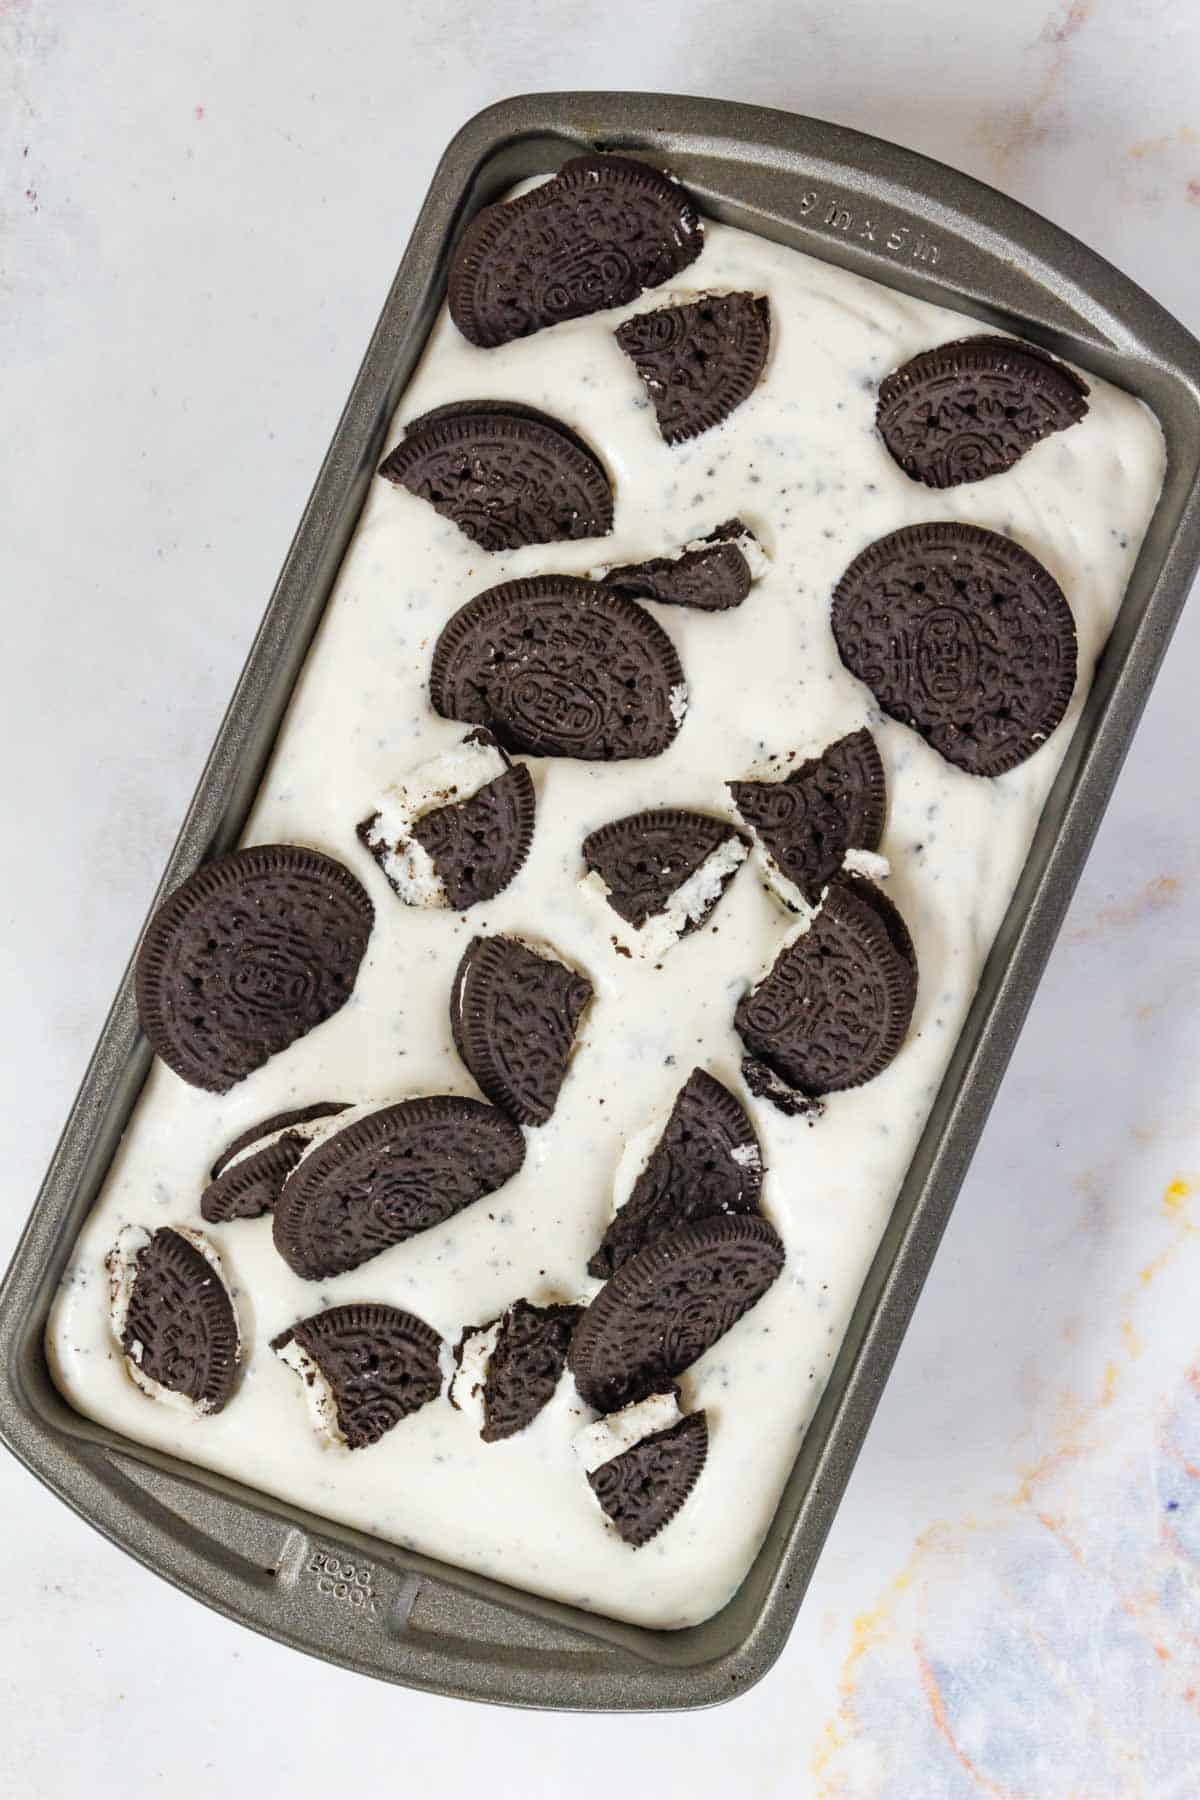 Cookies and cream ice cream topped with chocolate cookies, in a metal tub for freezing.